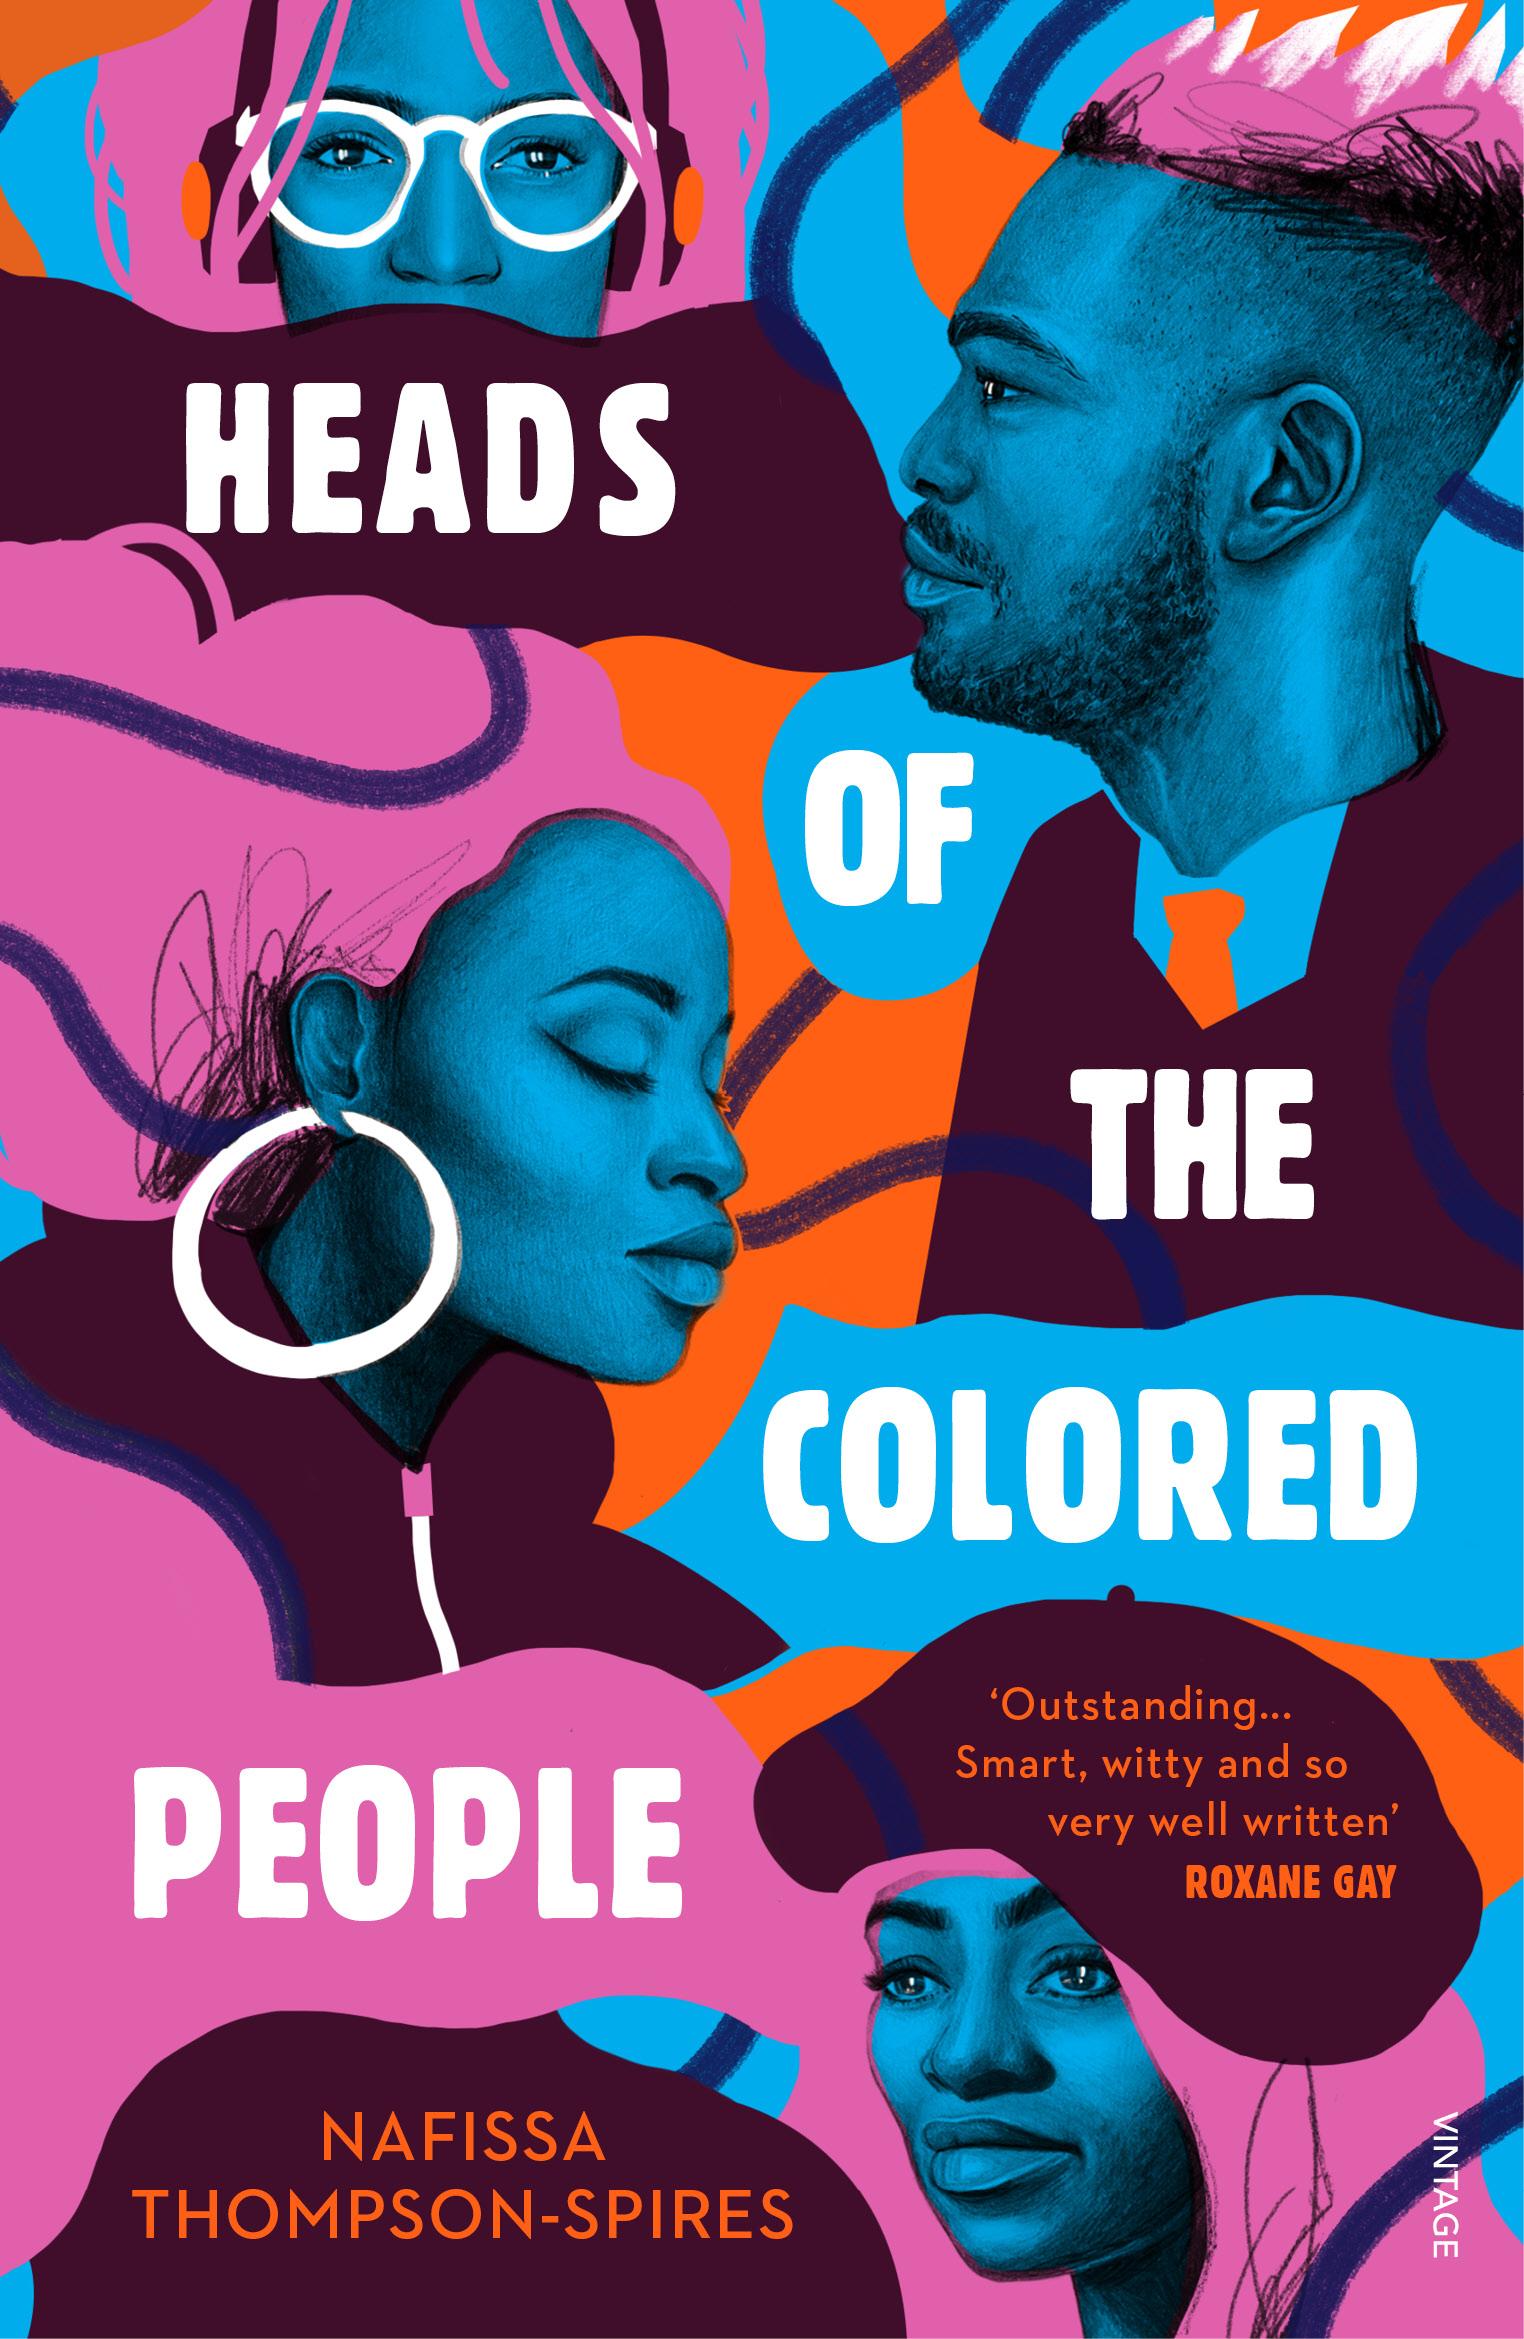 Heads of the Colored People - Nafissa Thompson-Spires